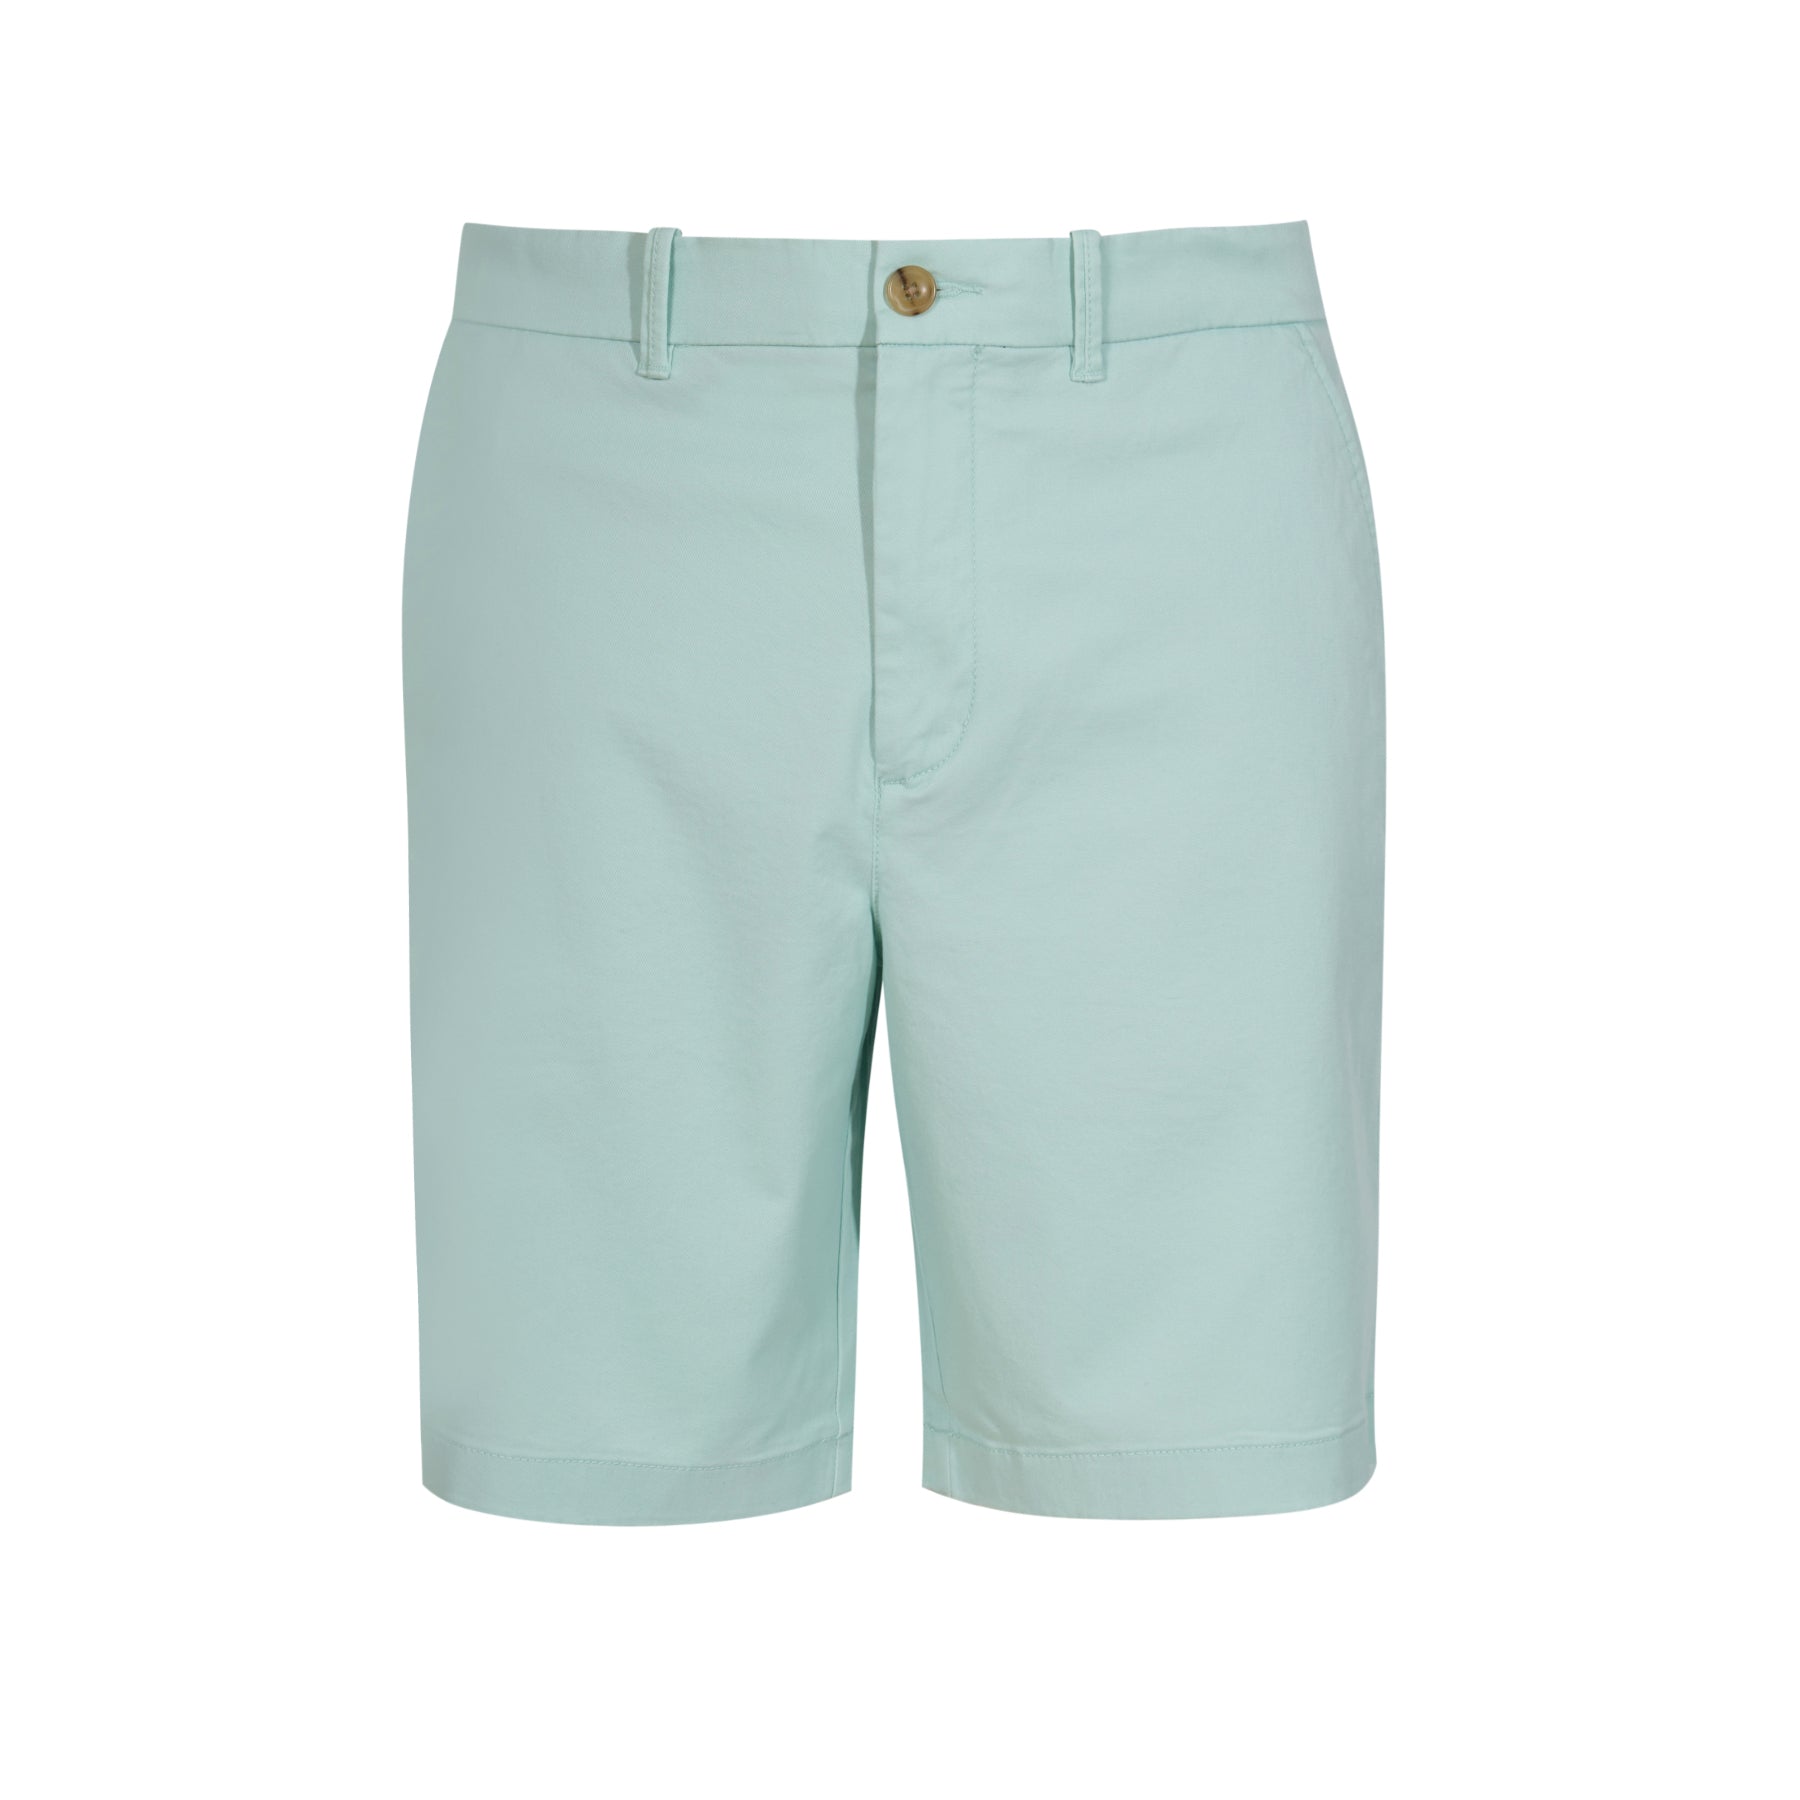 View Basic Recycled Cotton Chino Shorts In Surf Spray information